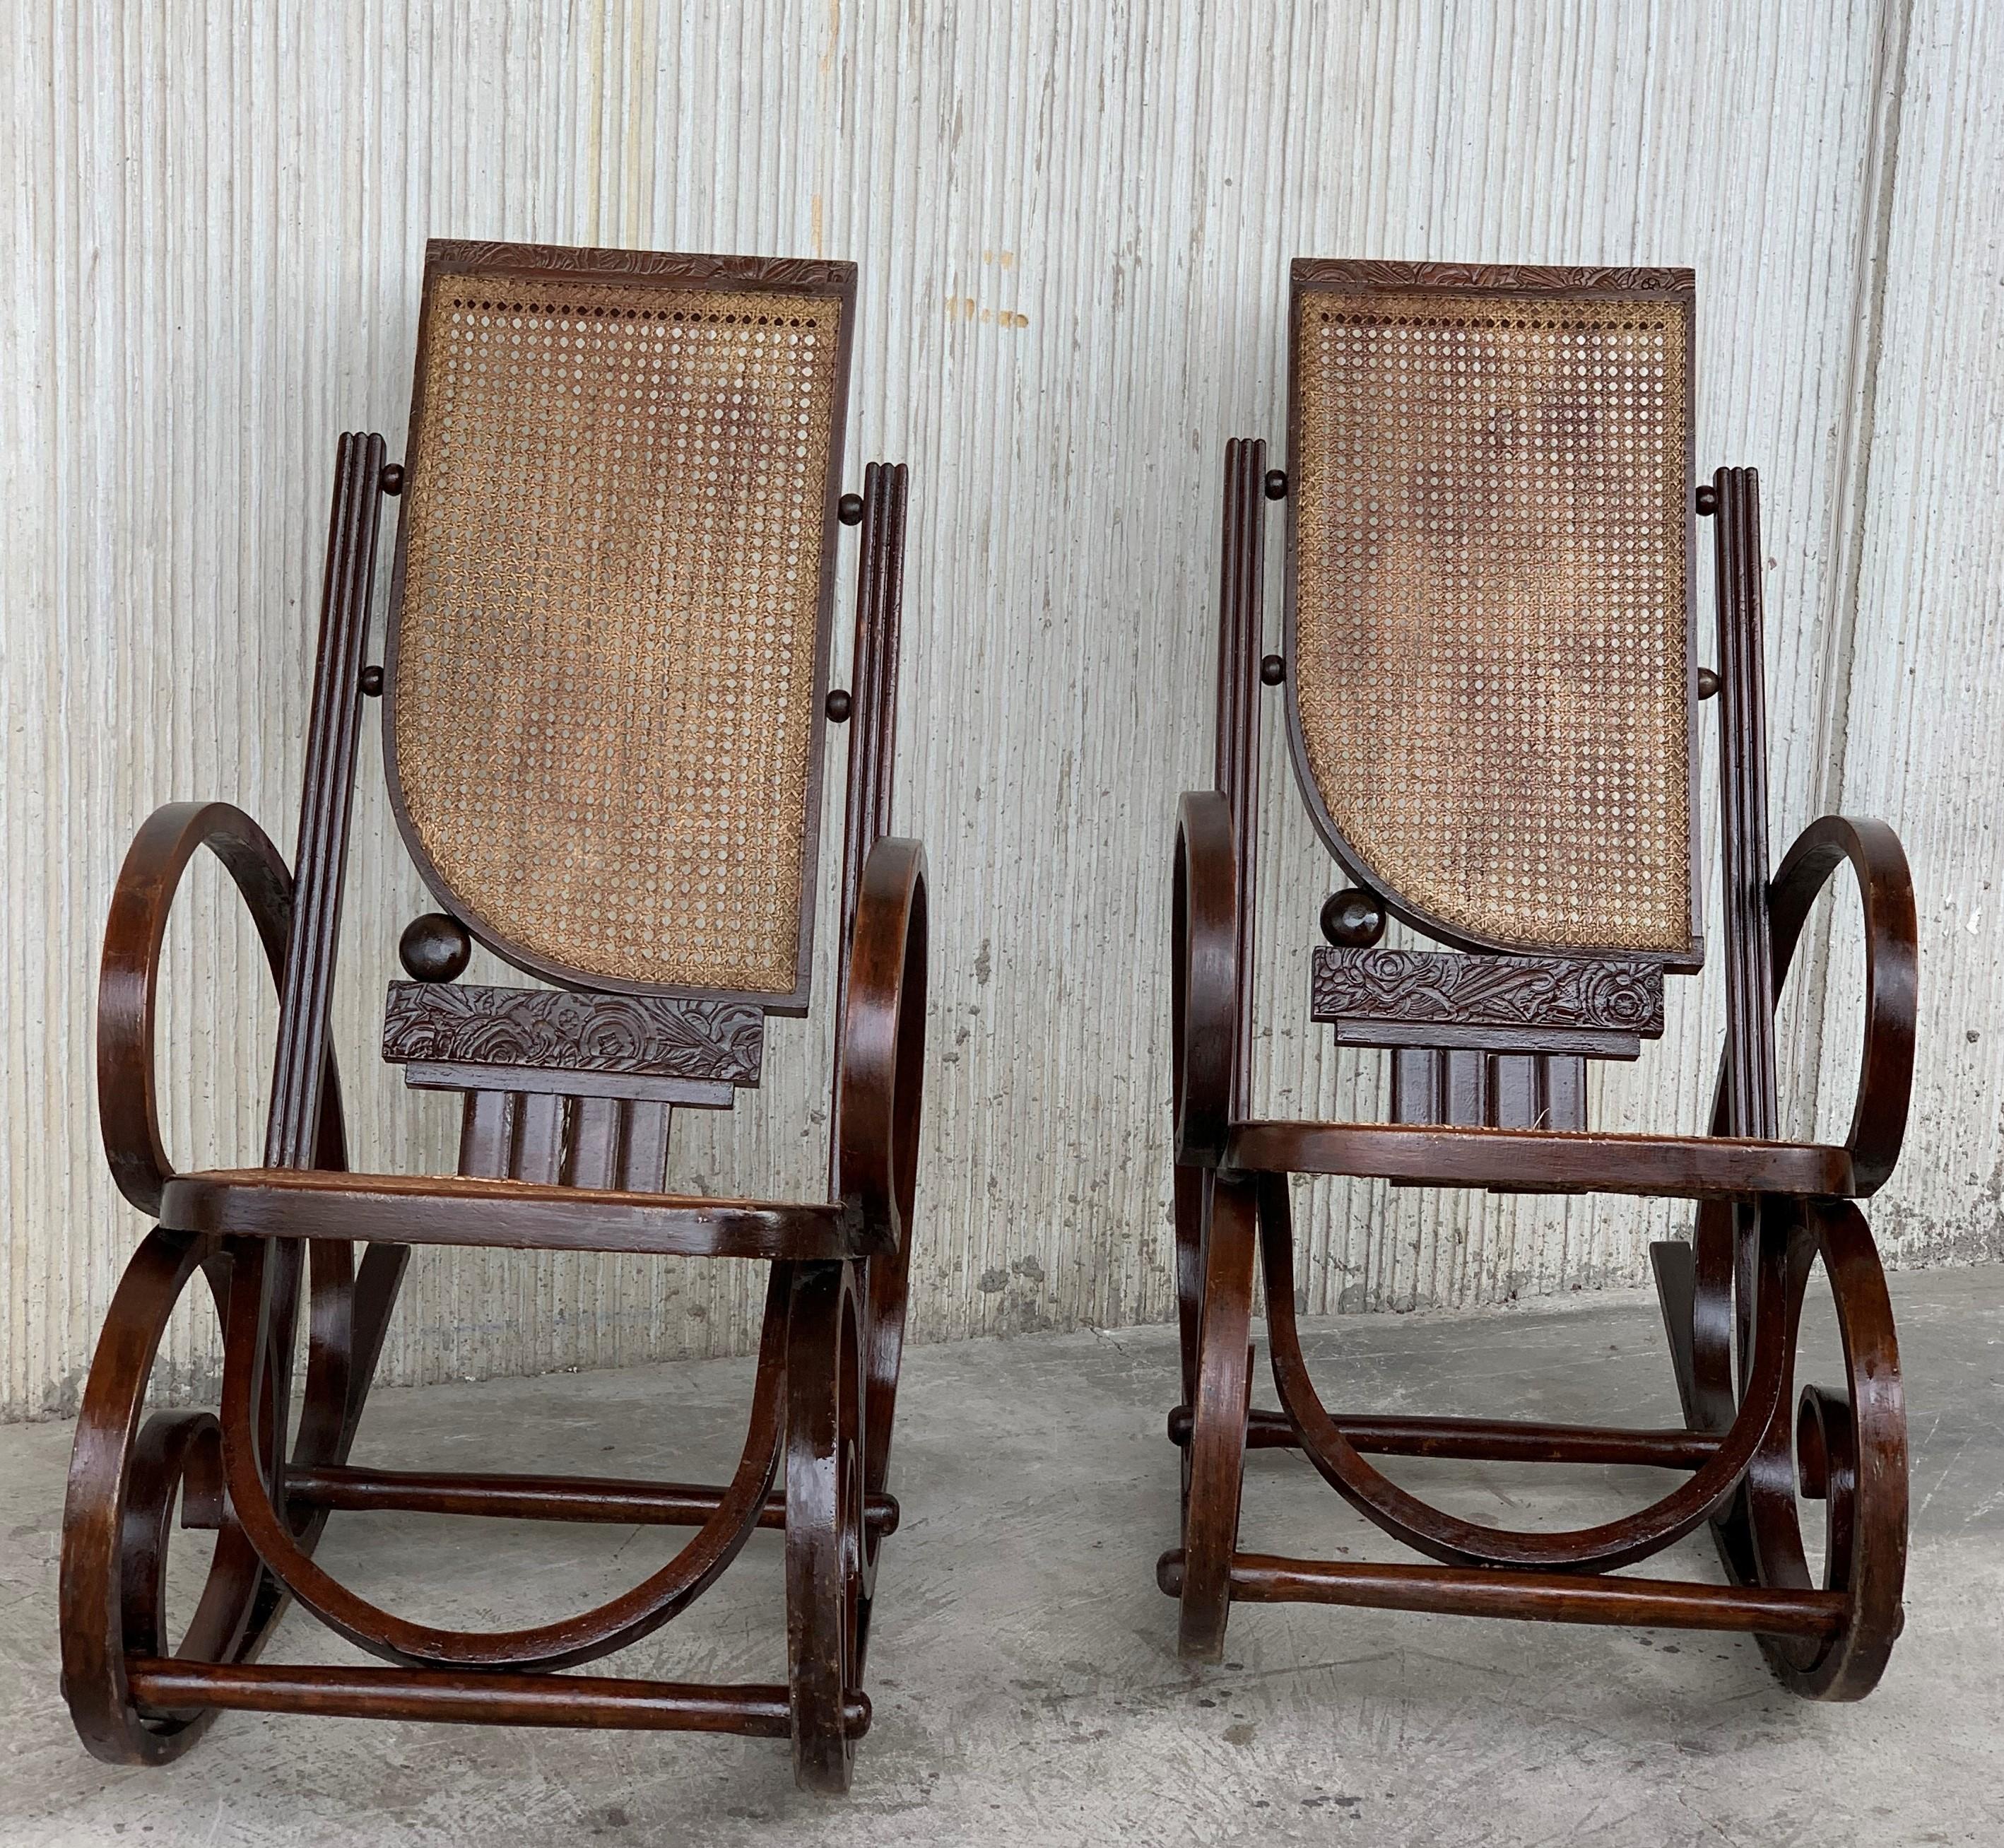 Stunning Art Deco bentwood and reed seats rocking chairs.
 